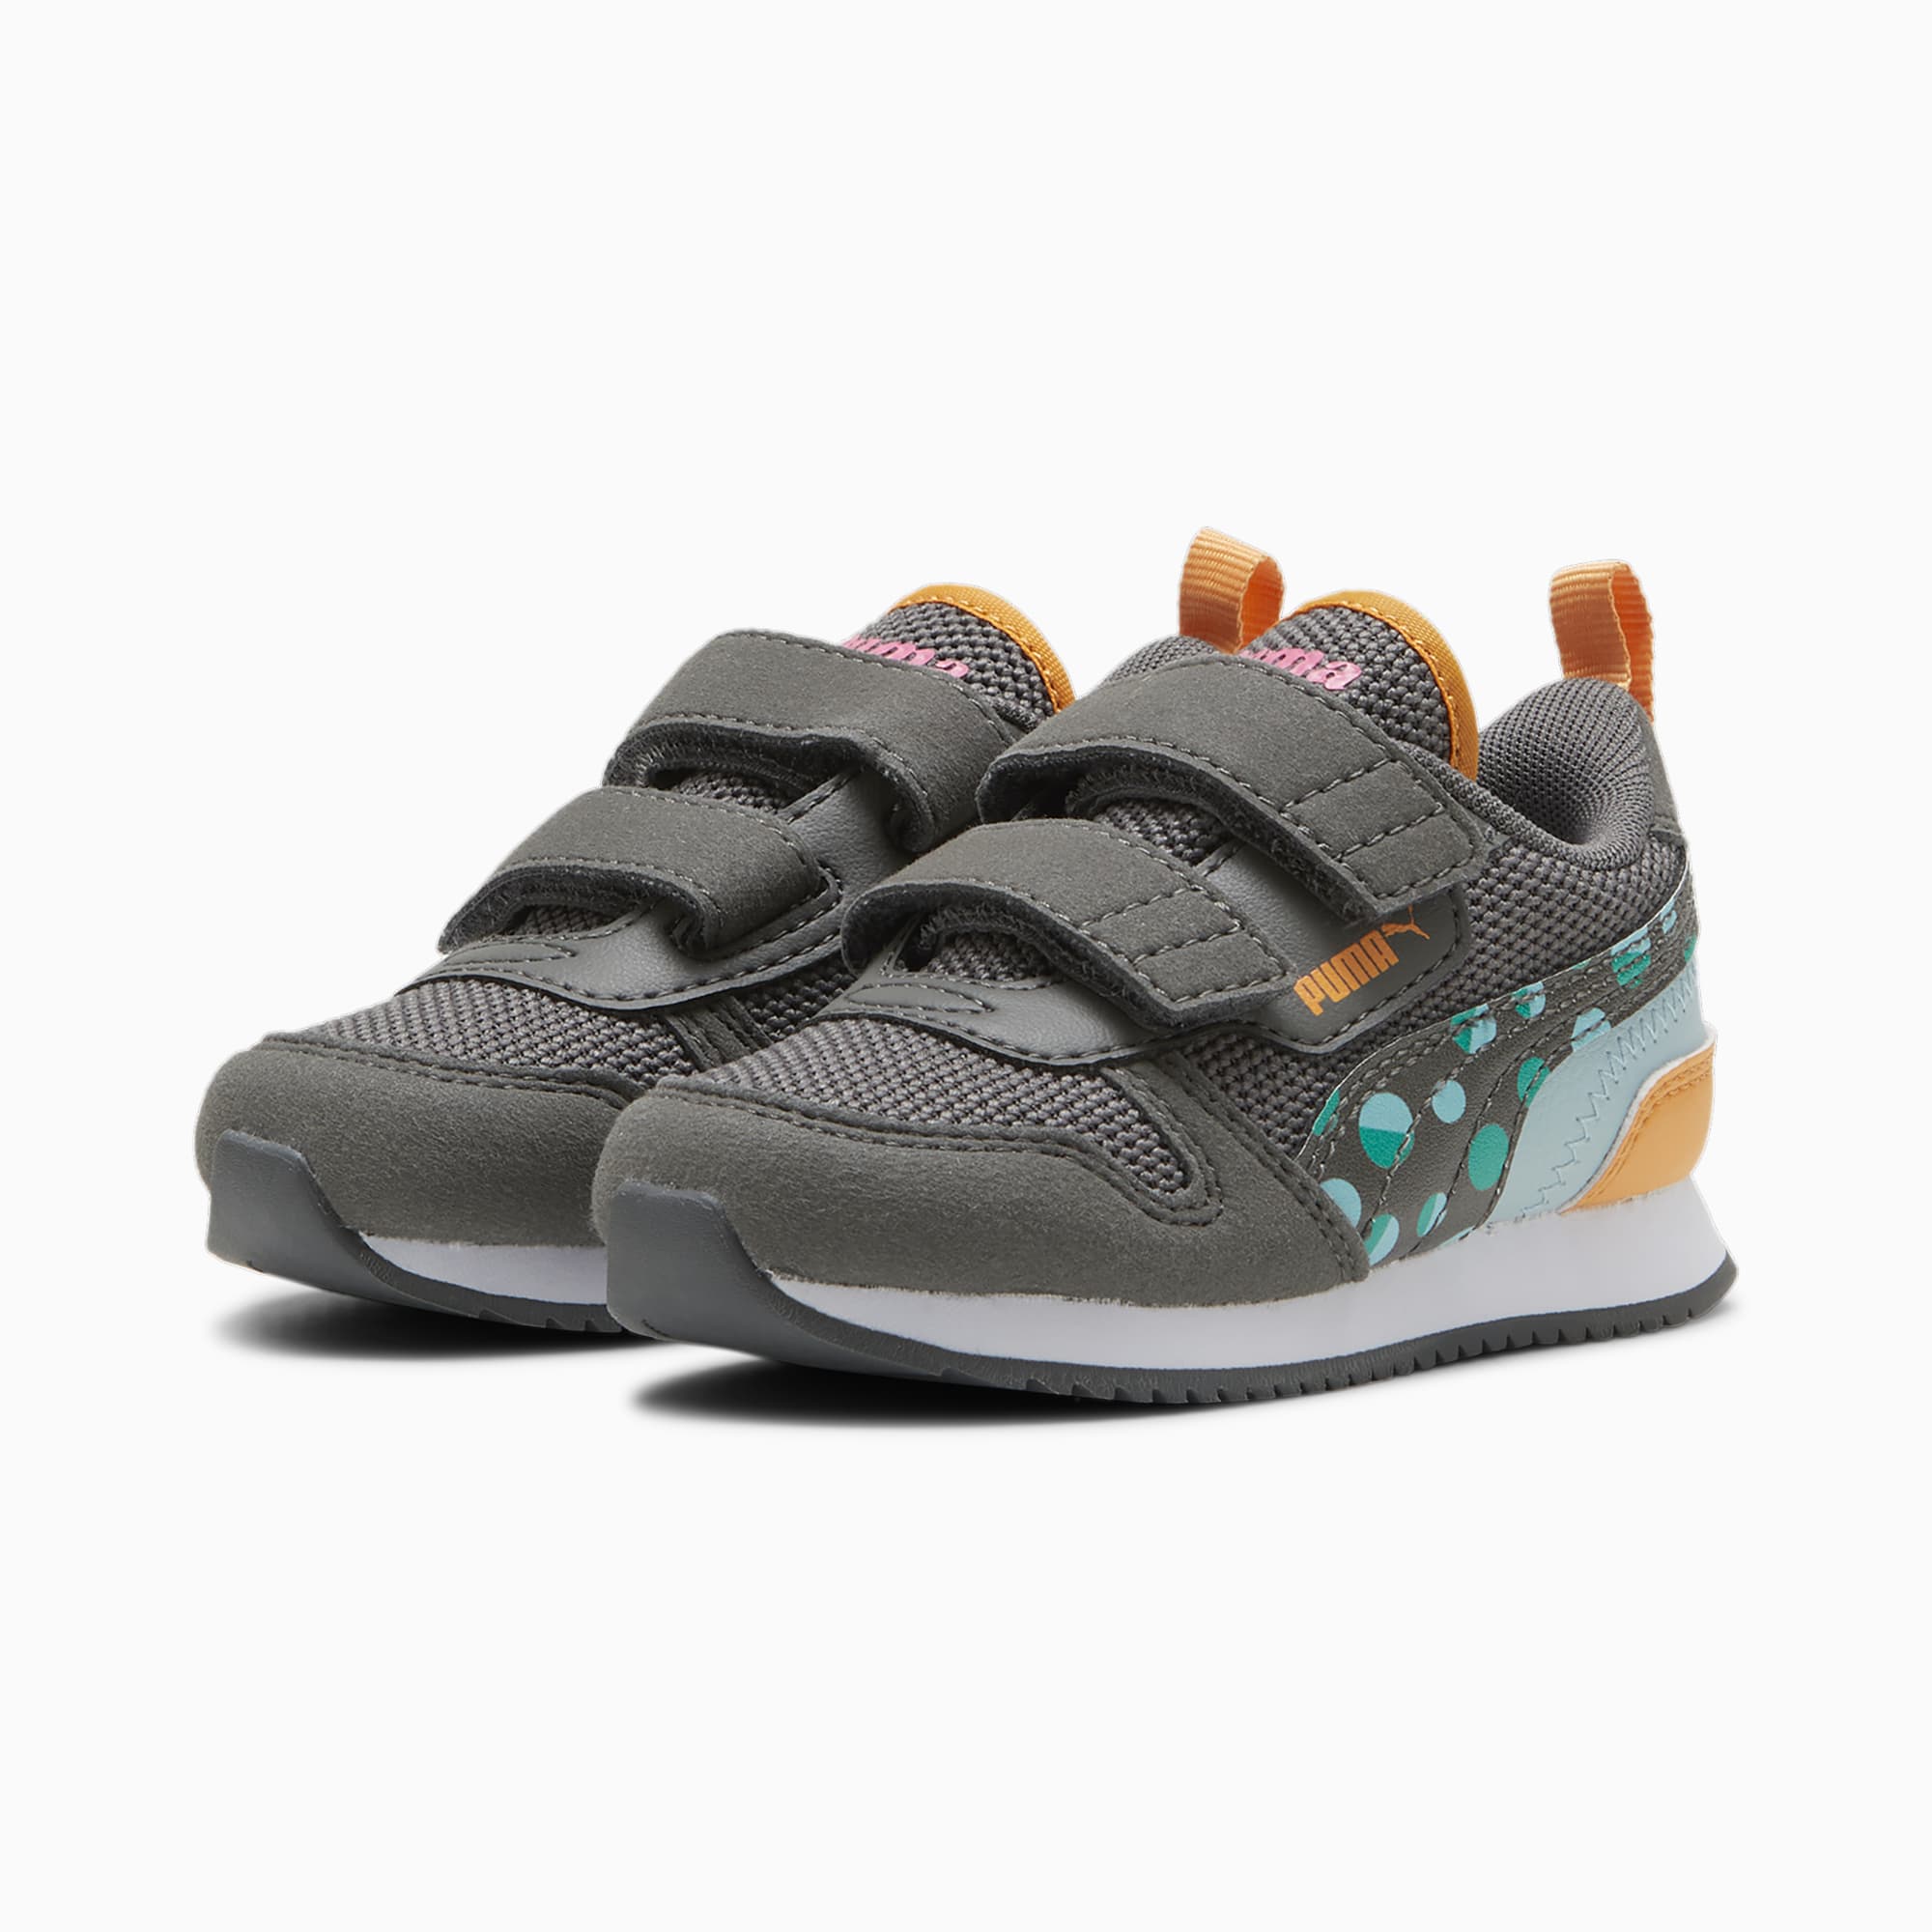 PUMA R78 Summer Camp Toddlers' Sneakers, Cool Dark Grey/Sparkling Green, Size 19, Shoes